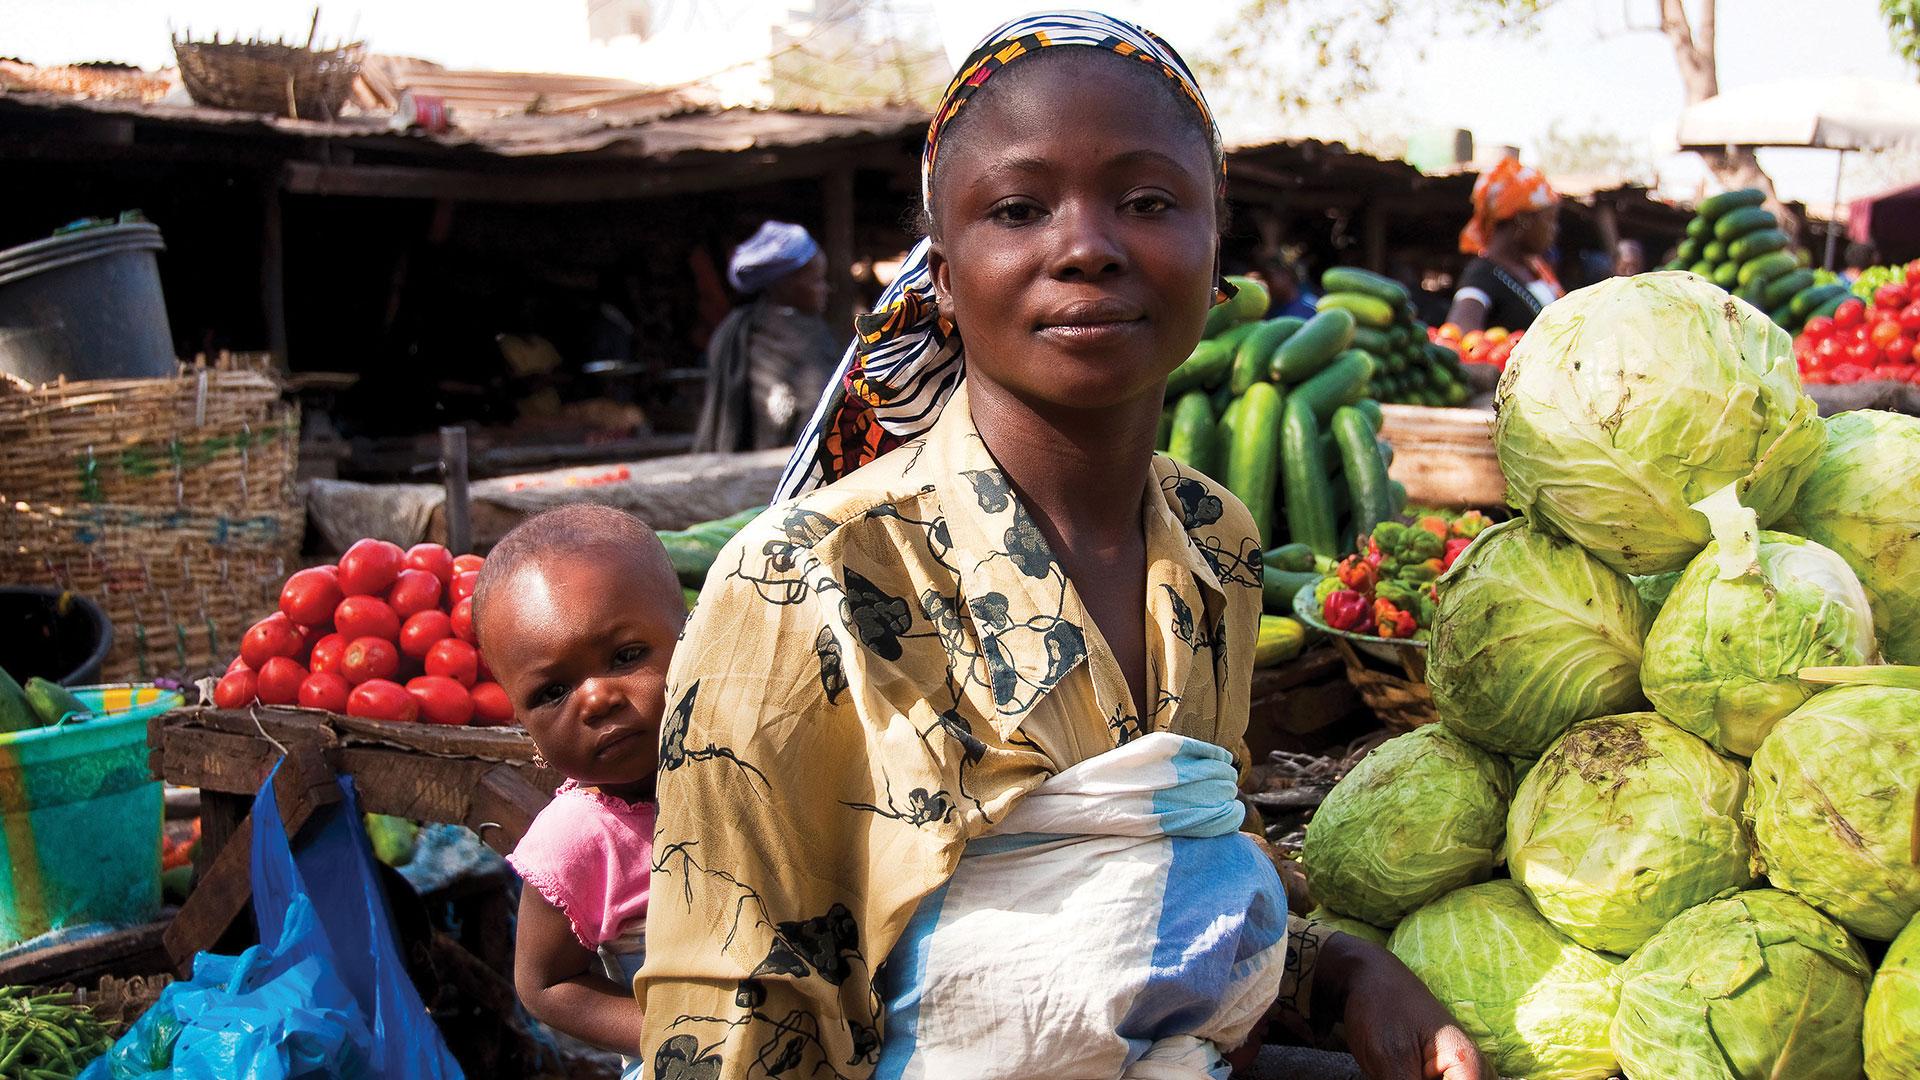 Vegetable stand owner carries her daughter on her back at an open market in Bamako, Mali (Photo: Bigstock)